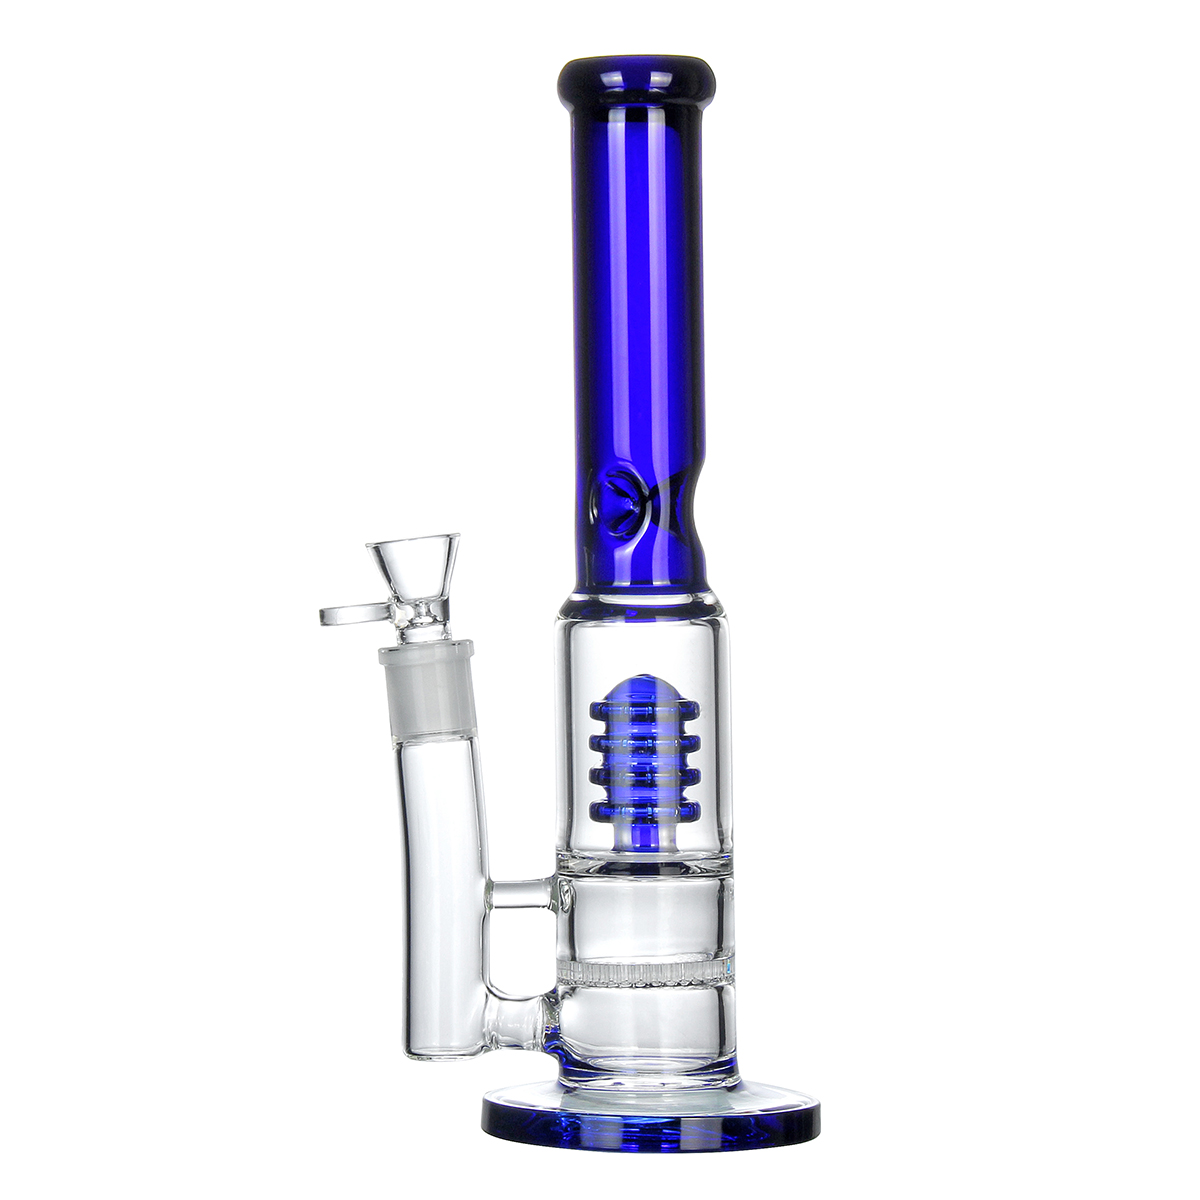 

12 Inch Bong Glass Double Percolator Glass Water Pipes with Coil Honeycomb Perc Hookah Water Pipe